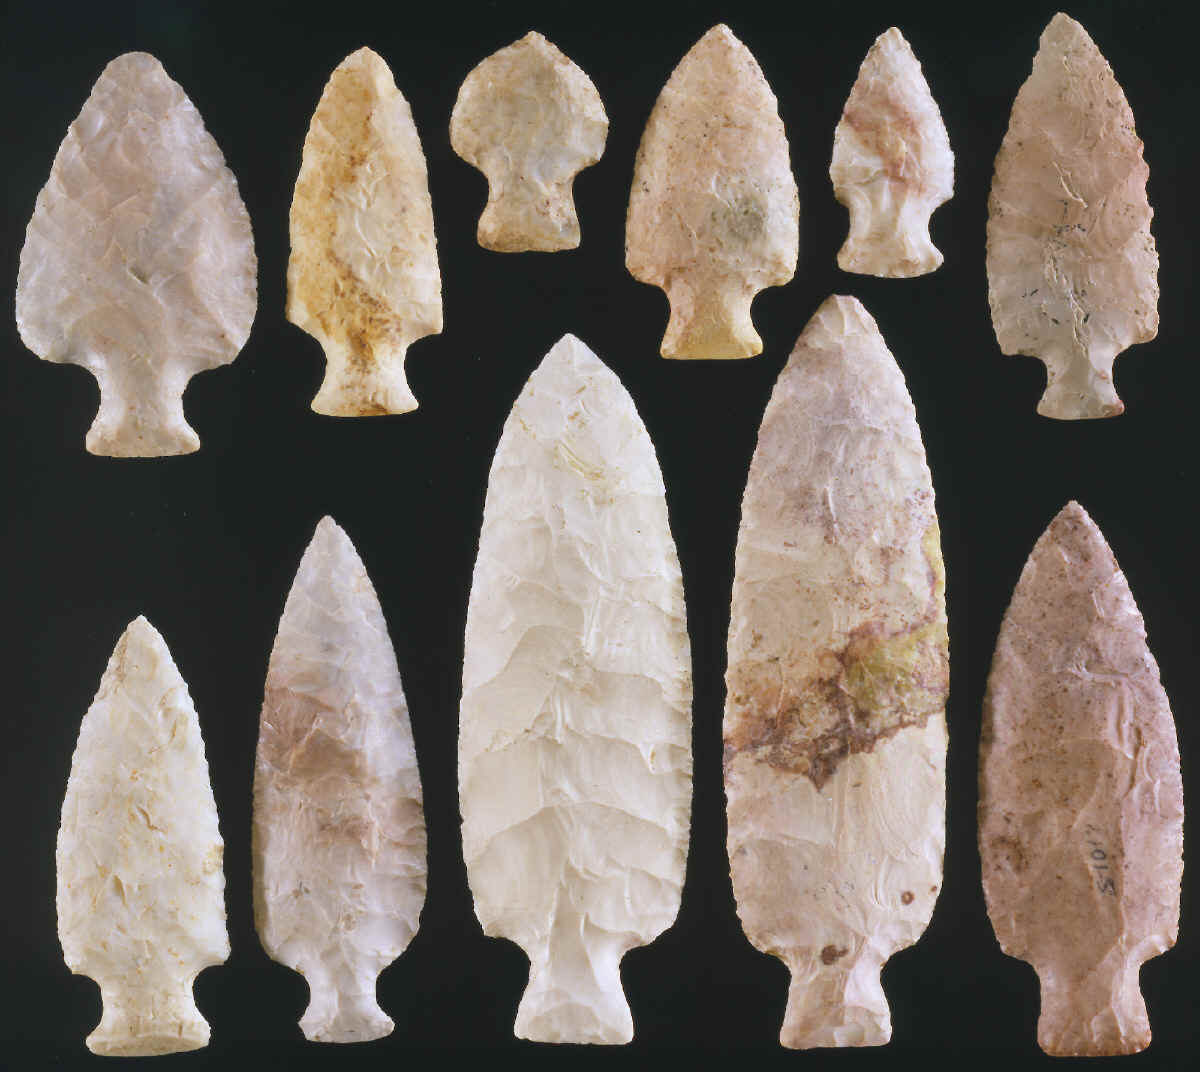 Group of 11 Table Rock points from Illinois and Missouri.